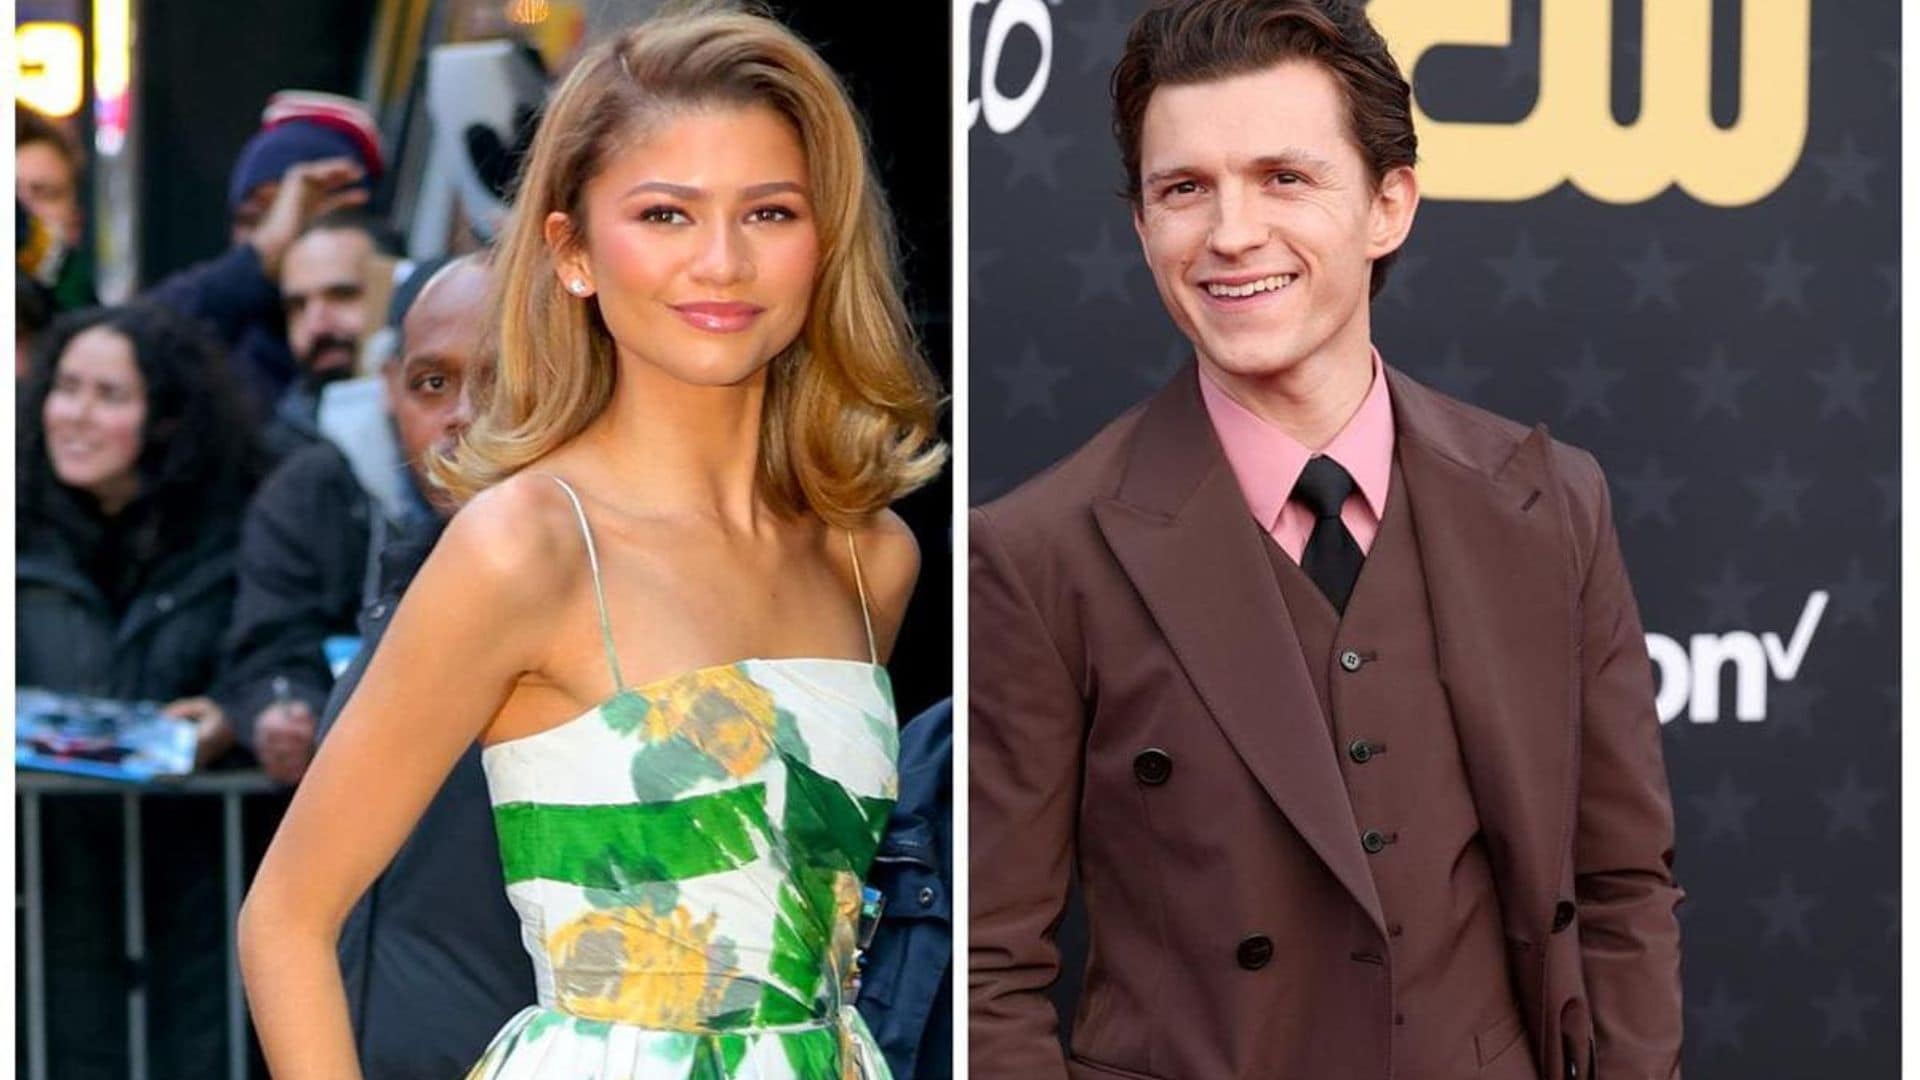 Zendaya wears dreamy princess dress in romantic outing with Tom Holland